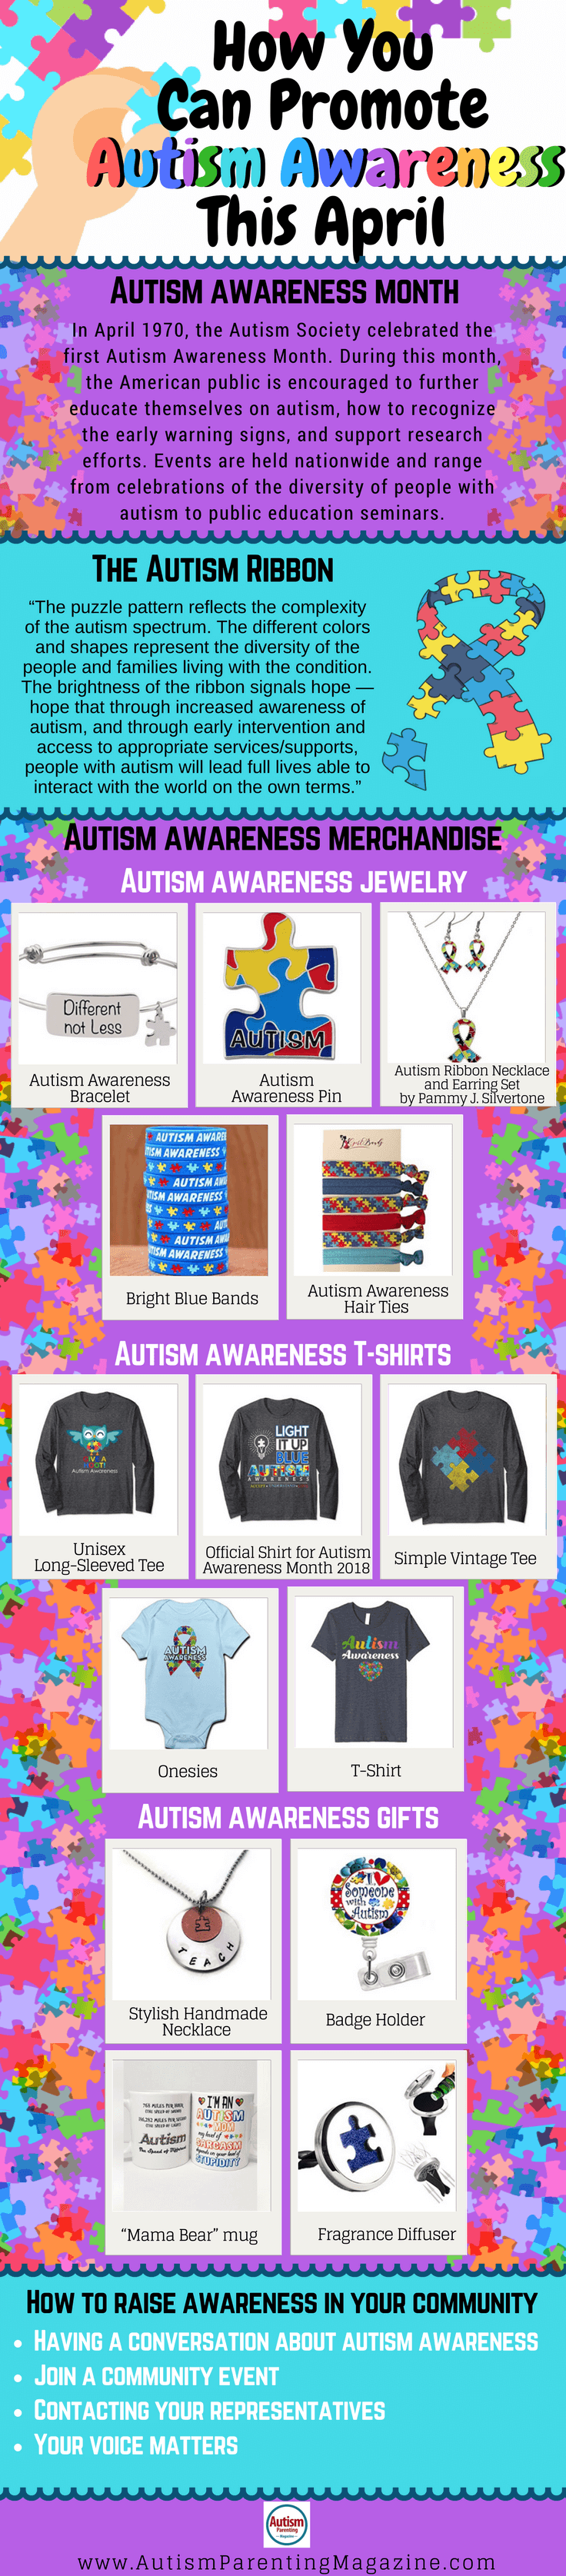 How You Can Promote Autism Awareness This April